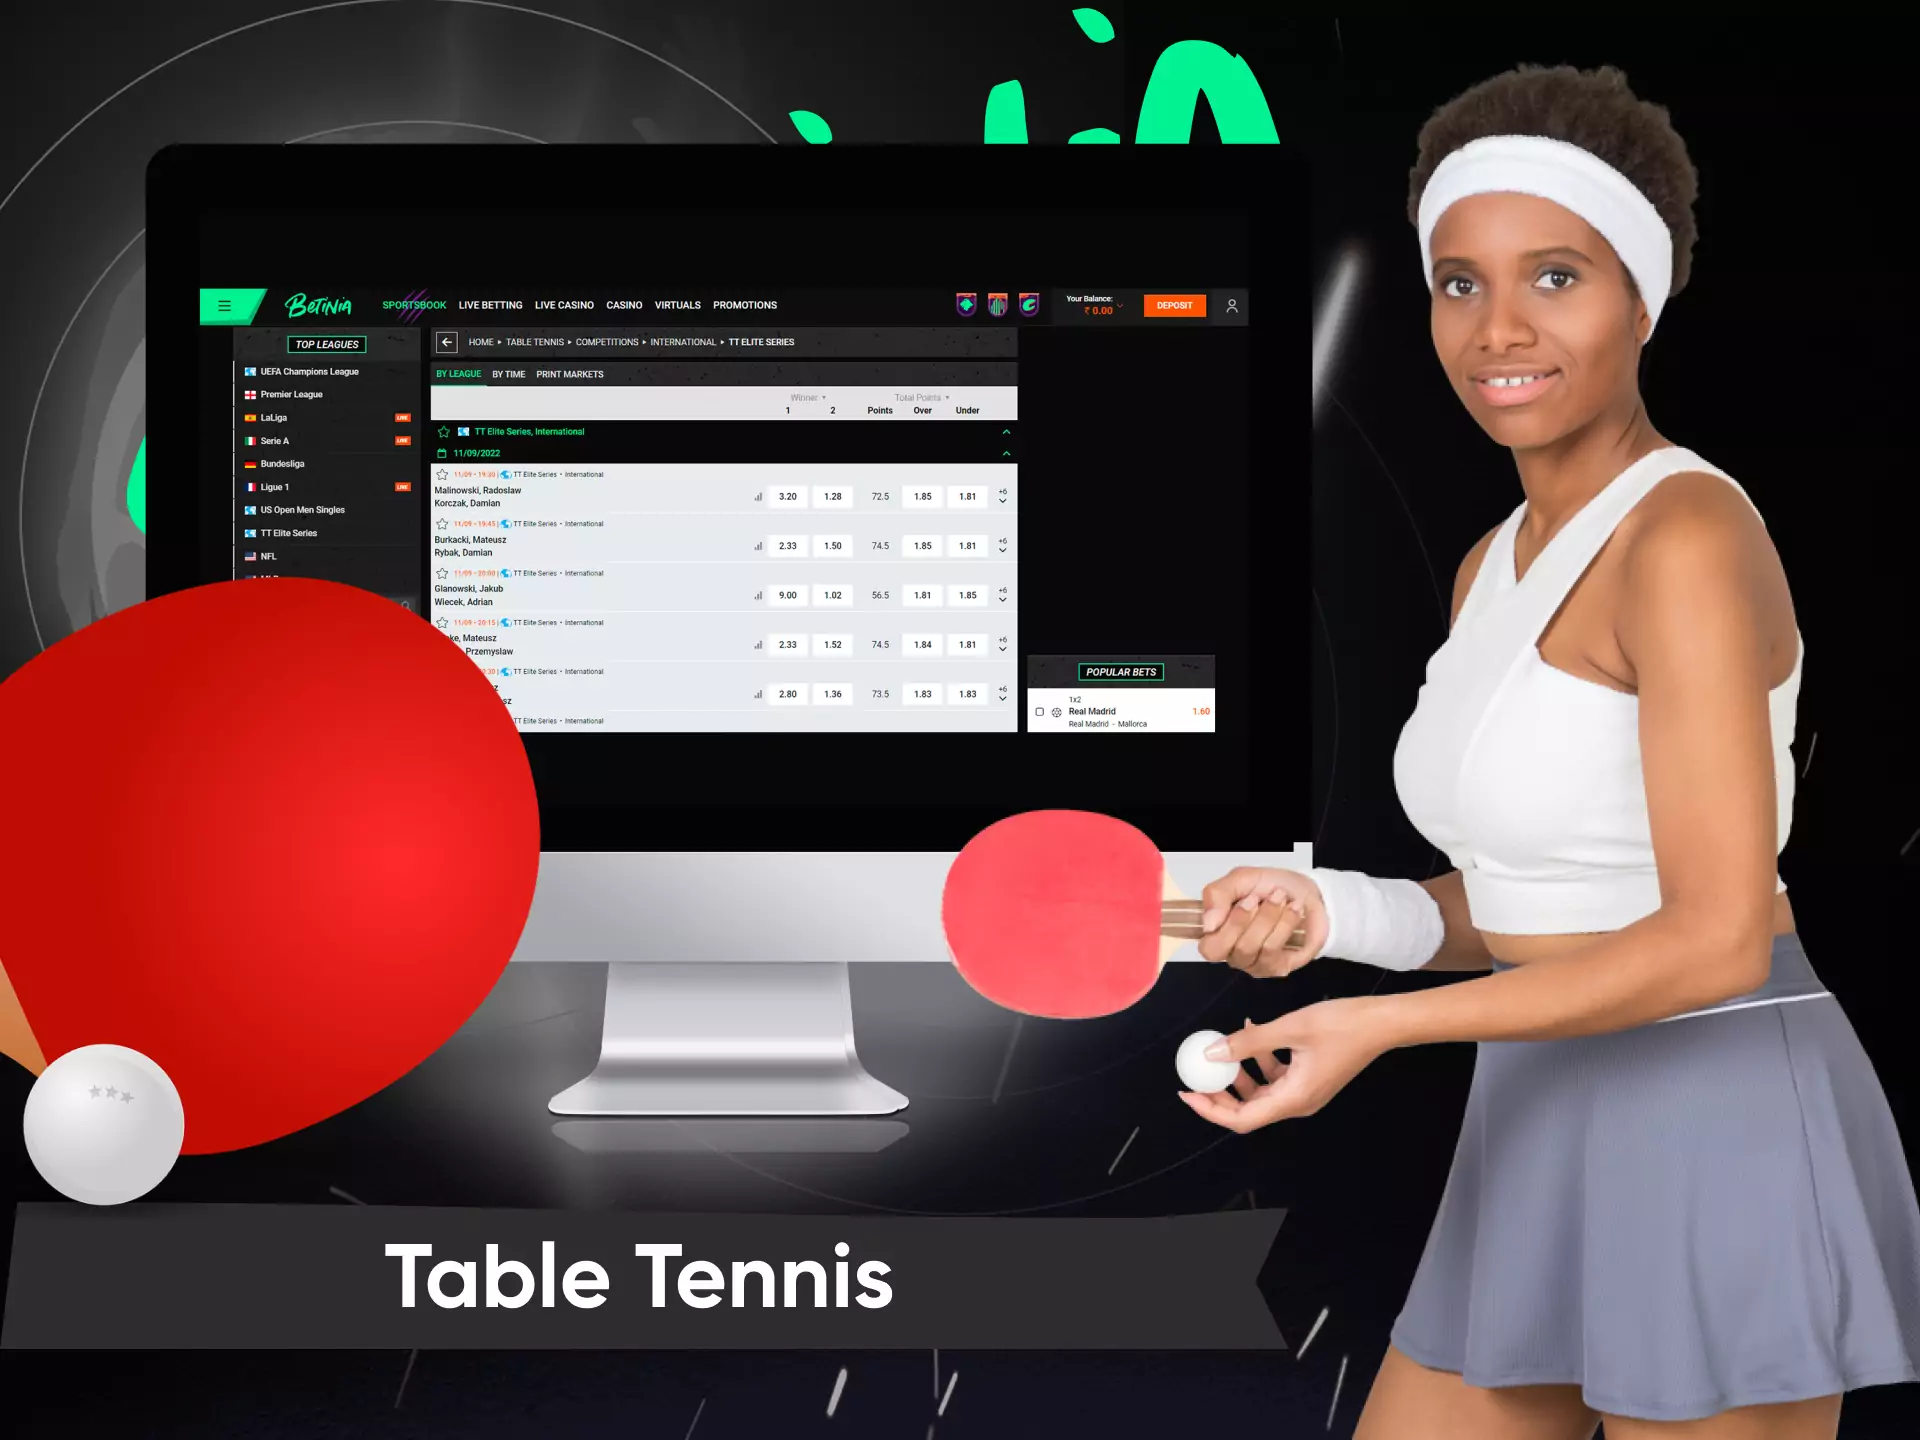 Betting on table tennis is also available in the Betinia sportsbook.